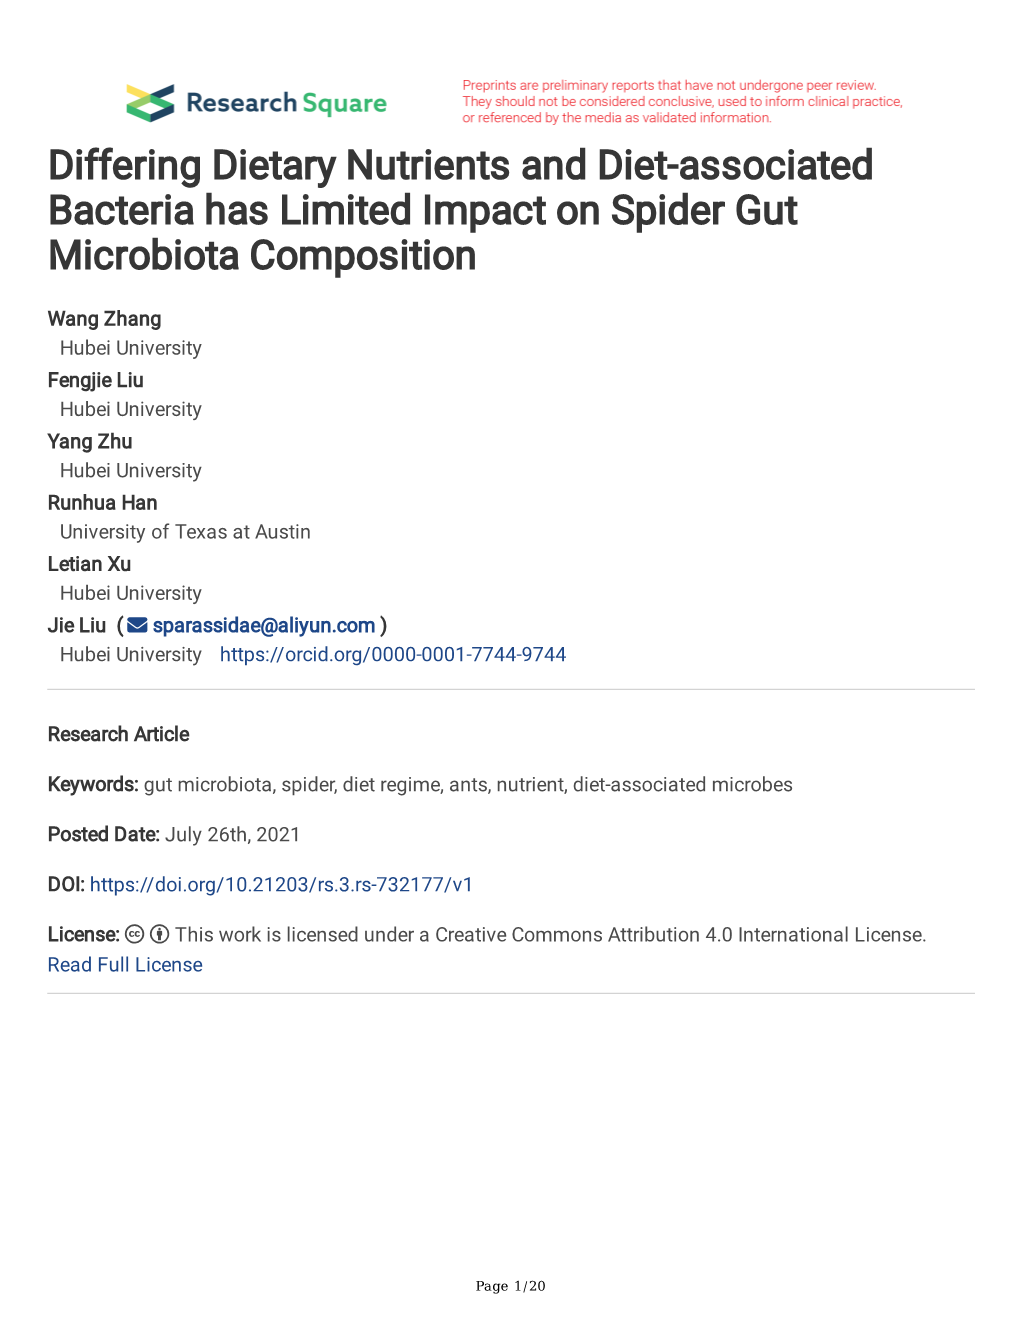 Differing Dietary Nutrients and Diet-Associated Bacteria Has Limited Impact on Spider Gut Microbiota Composition